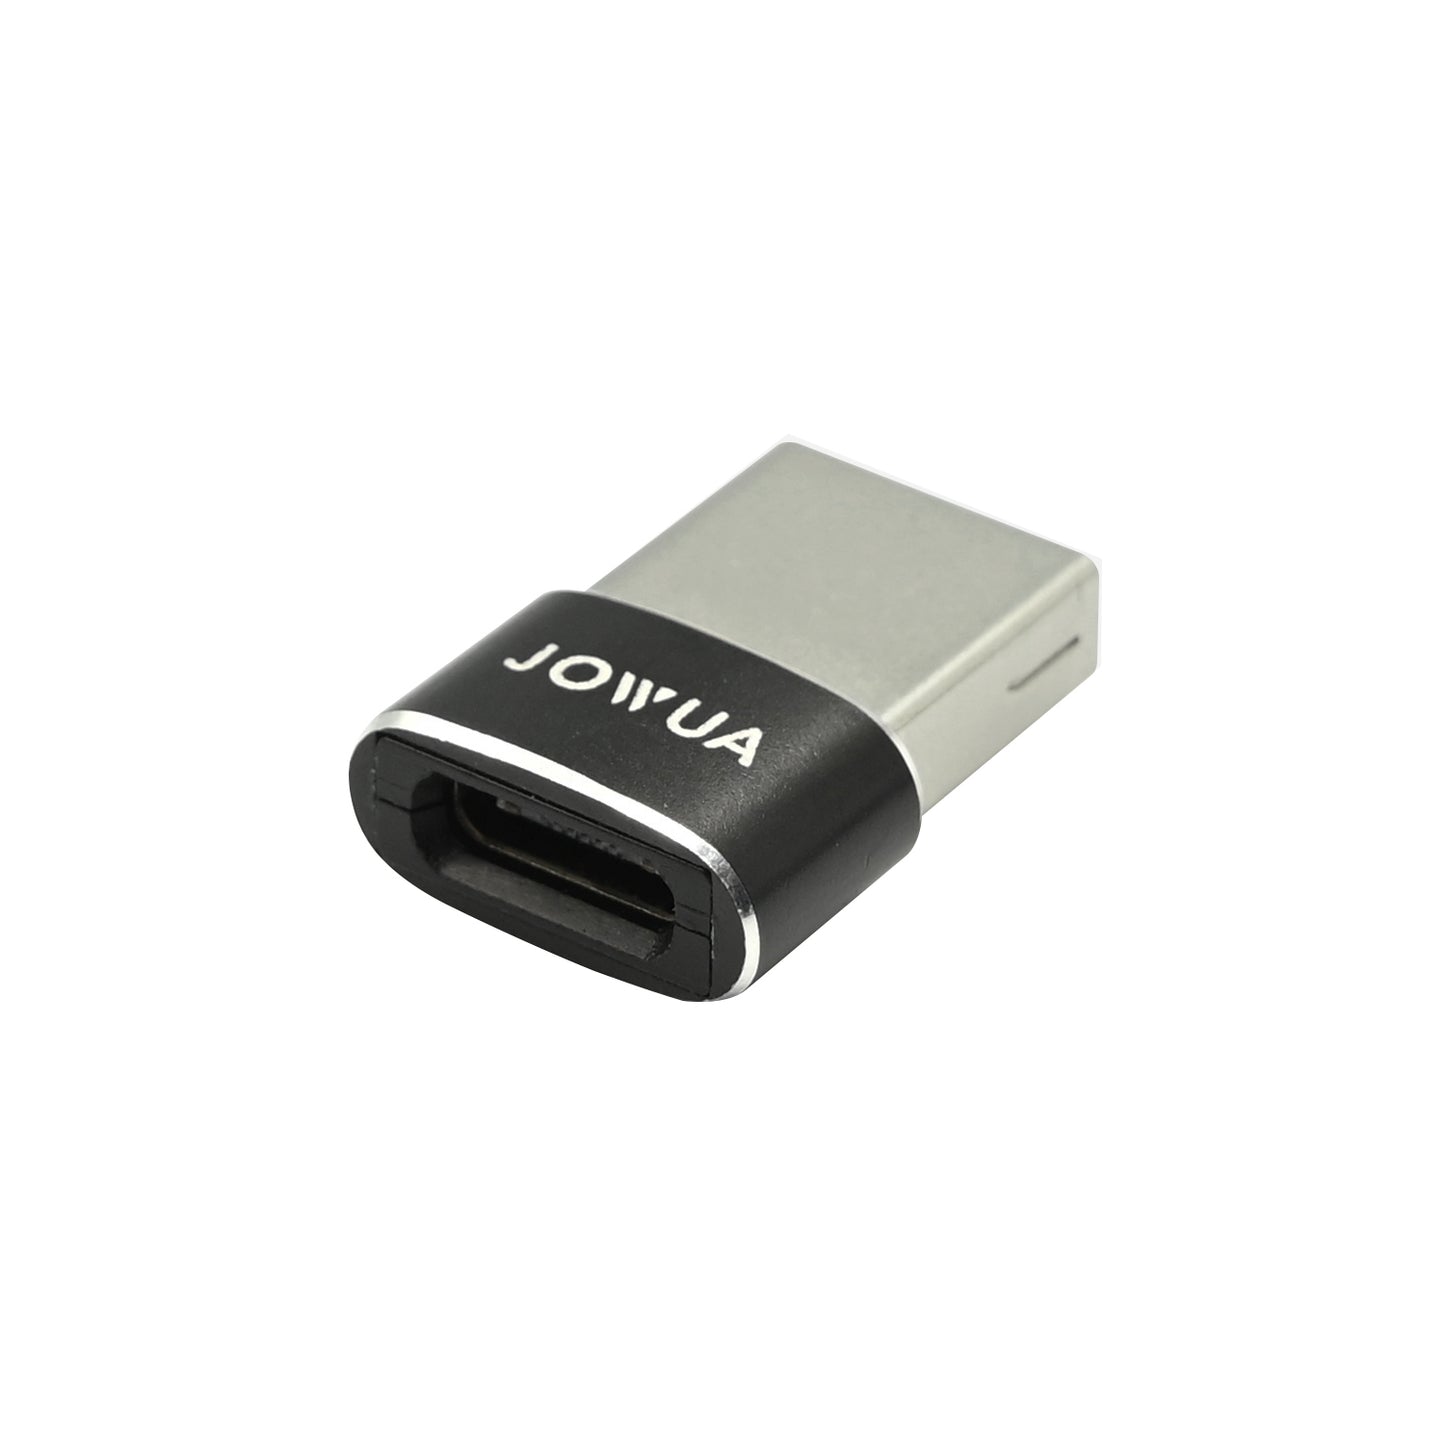 Jowua USB-C to USB-C Cable with USB-C Female to USB-A Male Adapter